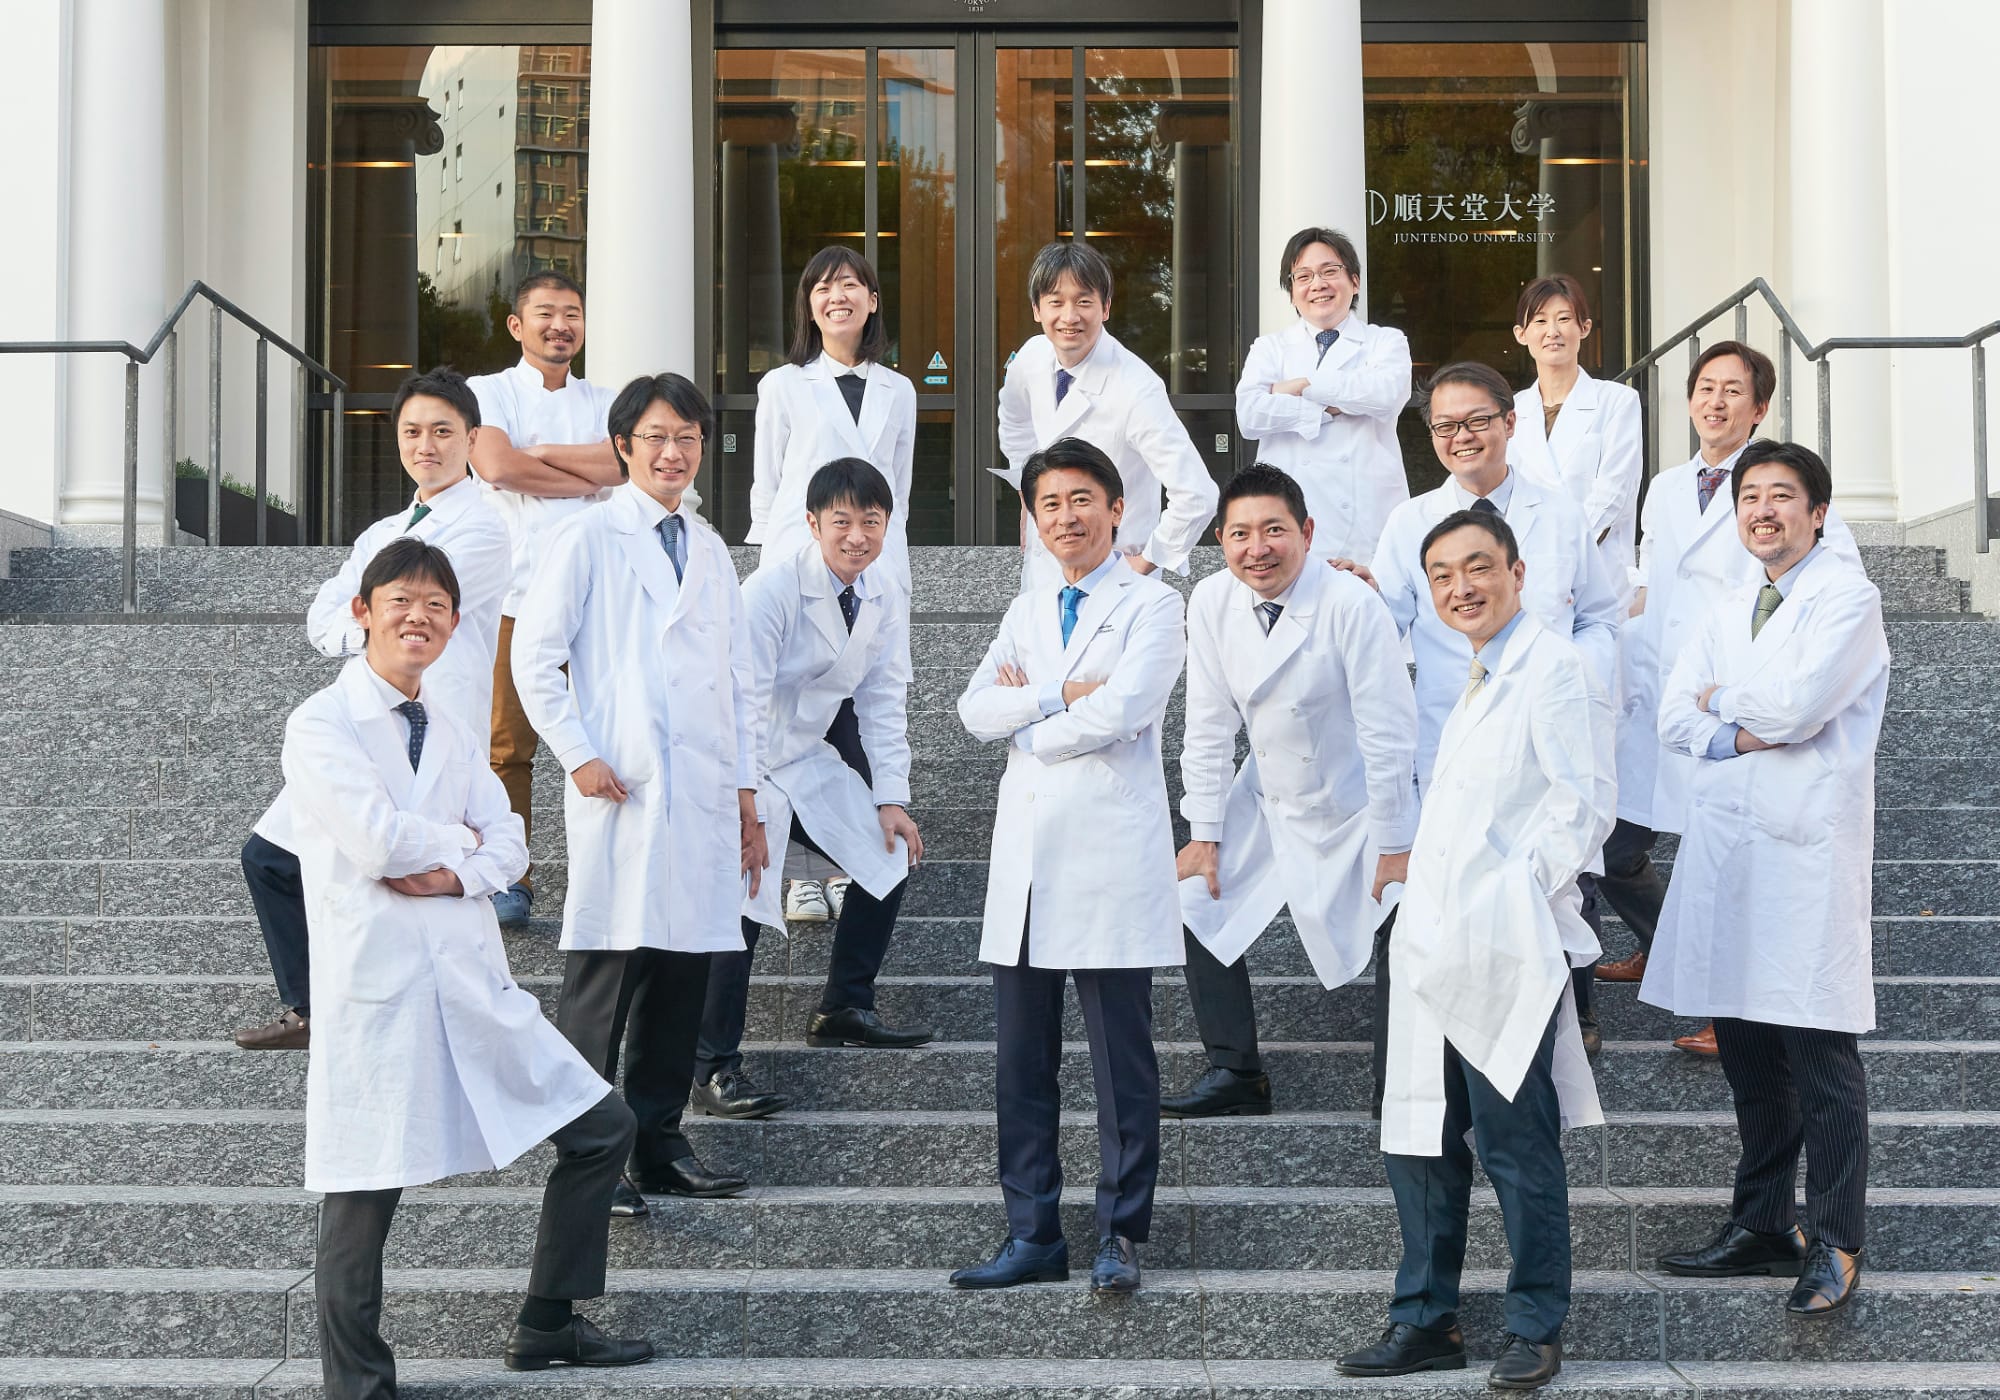 Carving out the future of cardiovascular biology and medicine Delivering new medical insight from Japan to the world